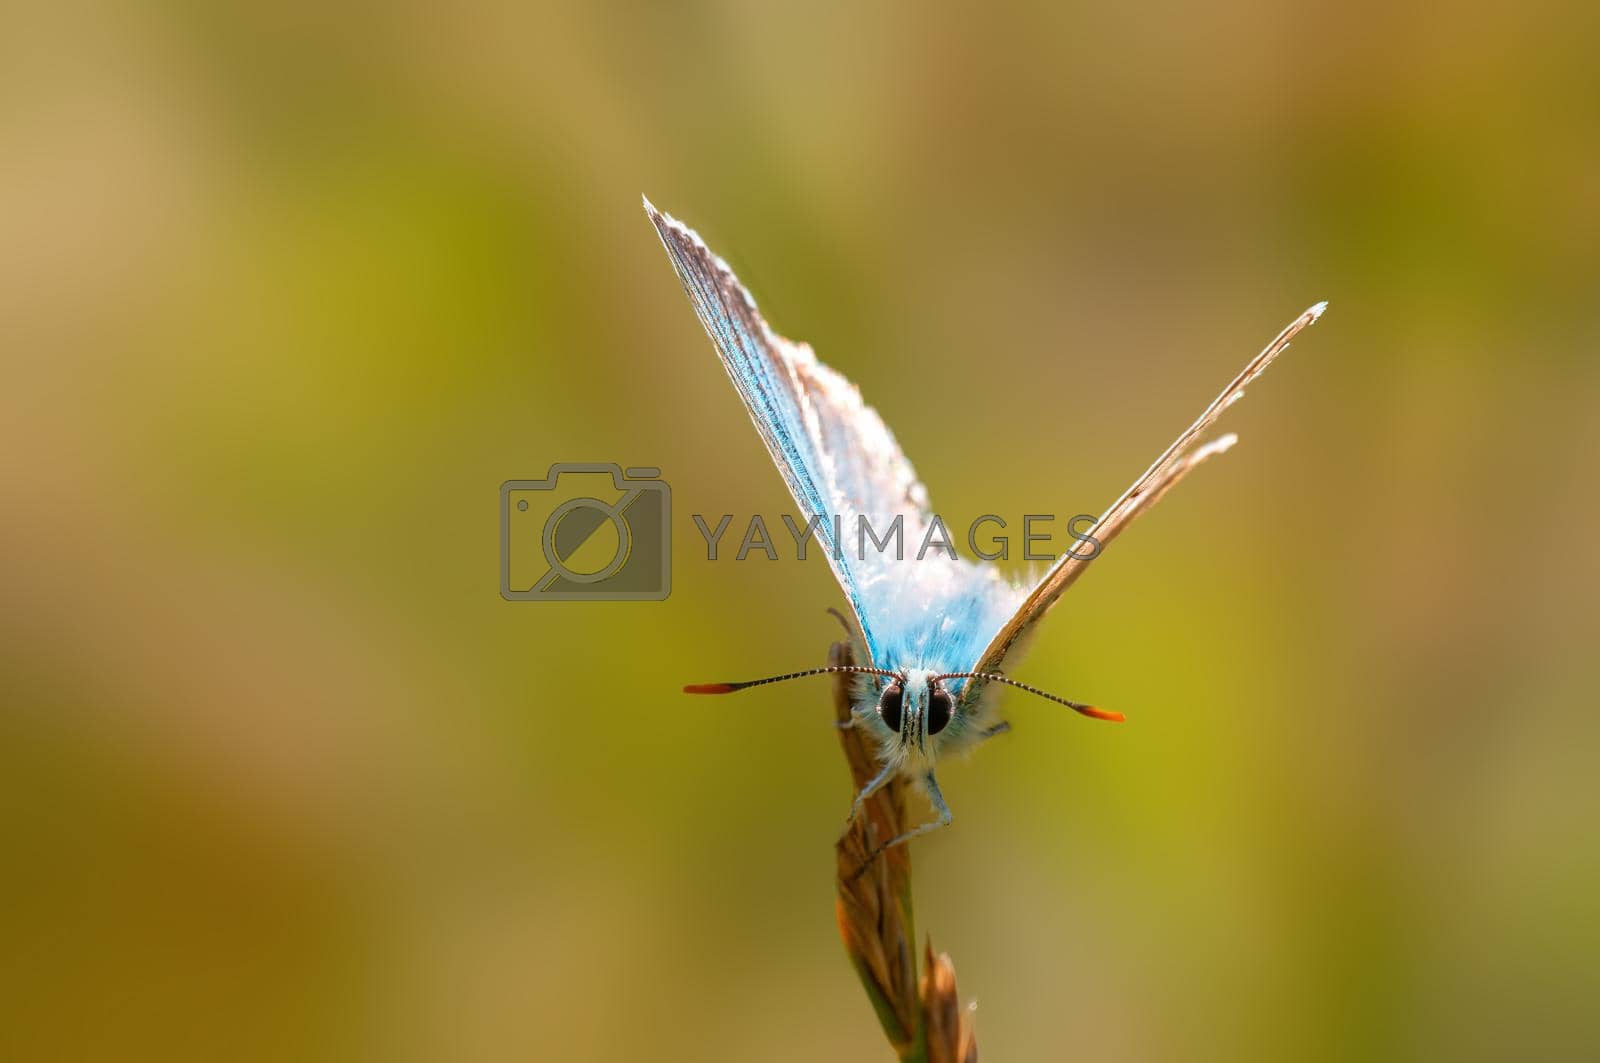 Royalty free image of one common blue butterfly sits on a stalk in a meadow by mario_plechaty_photography